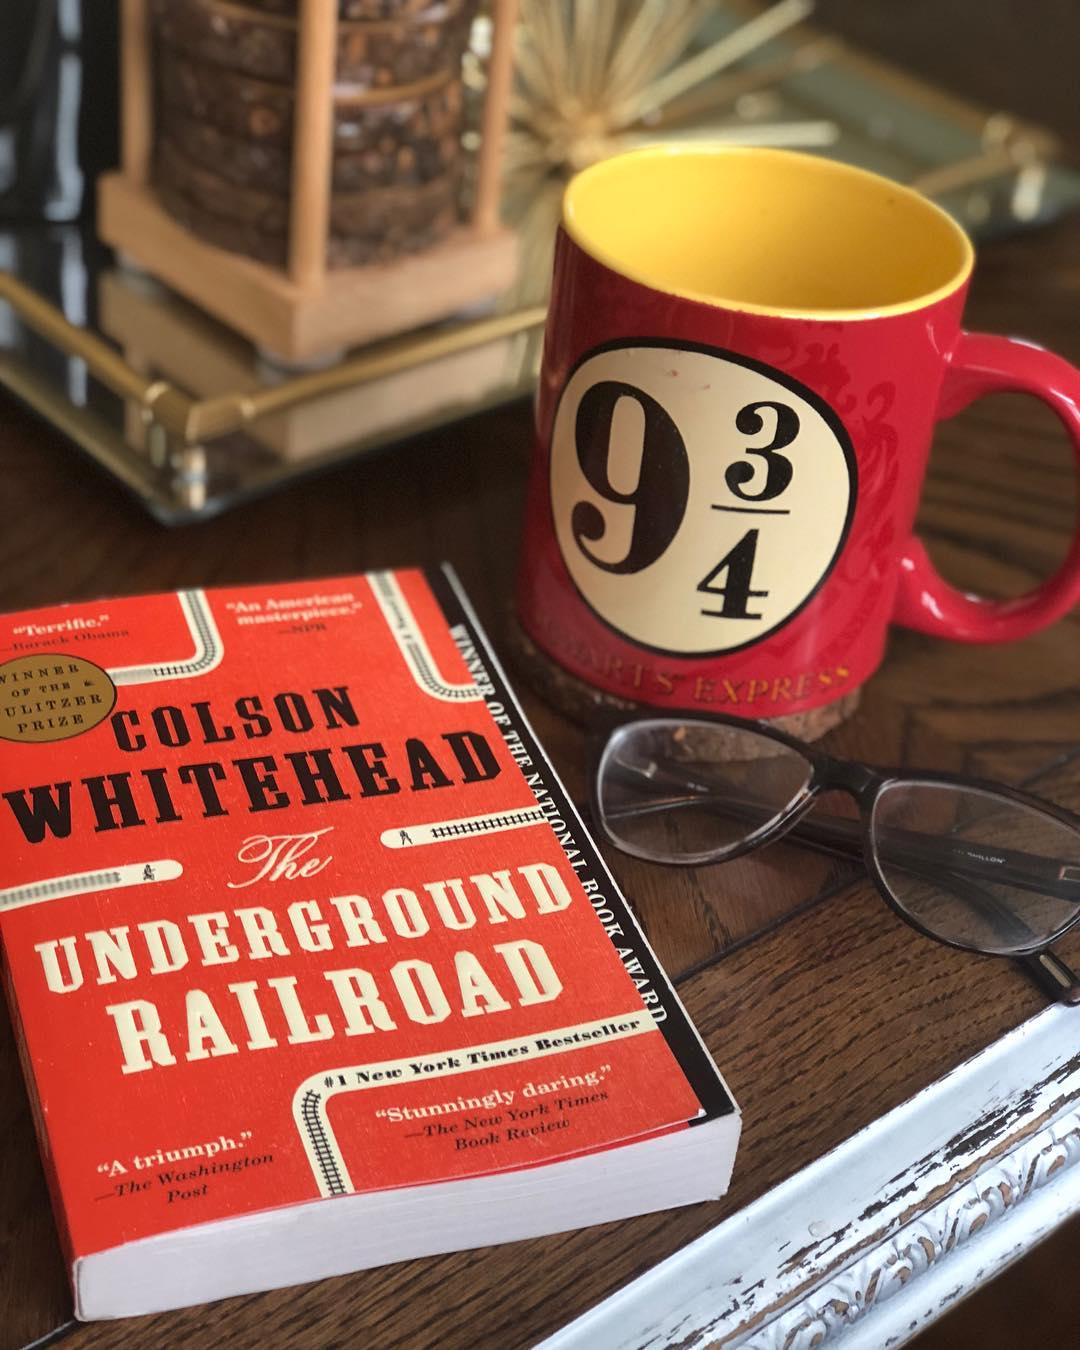 THE UNDERGROUND RAILROAD by Colson Whitehead.